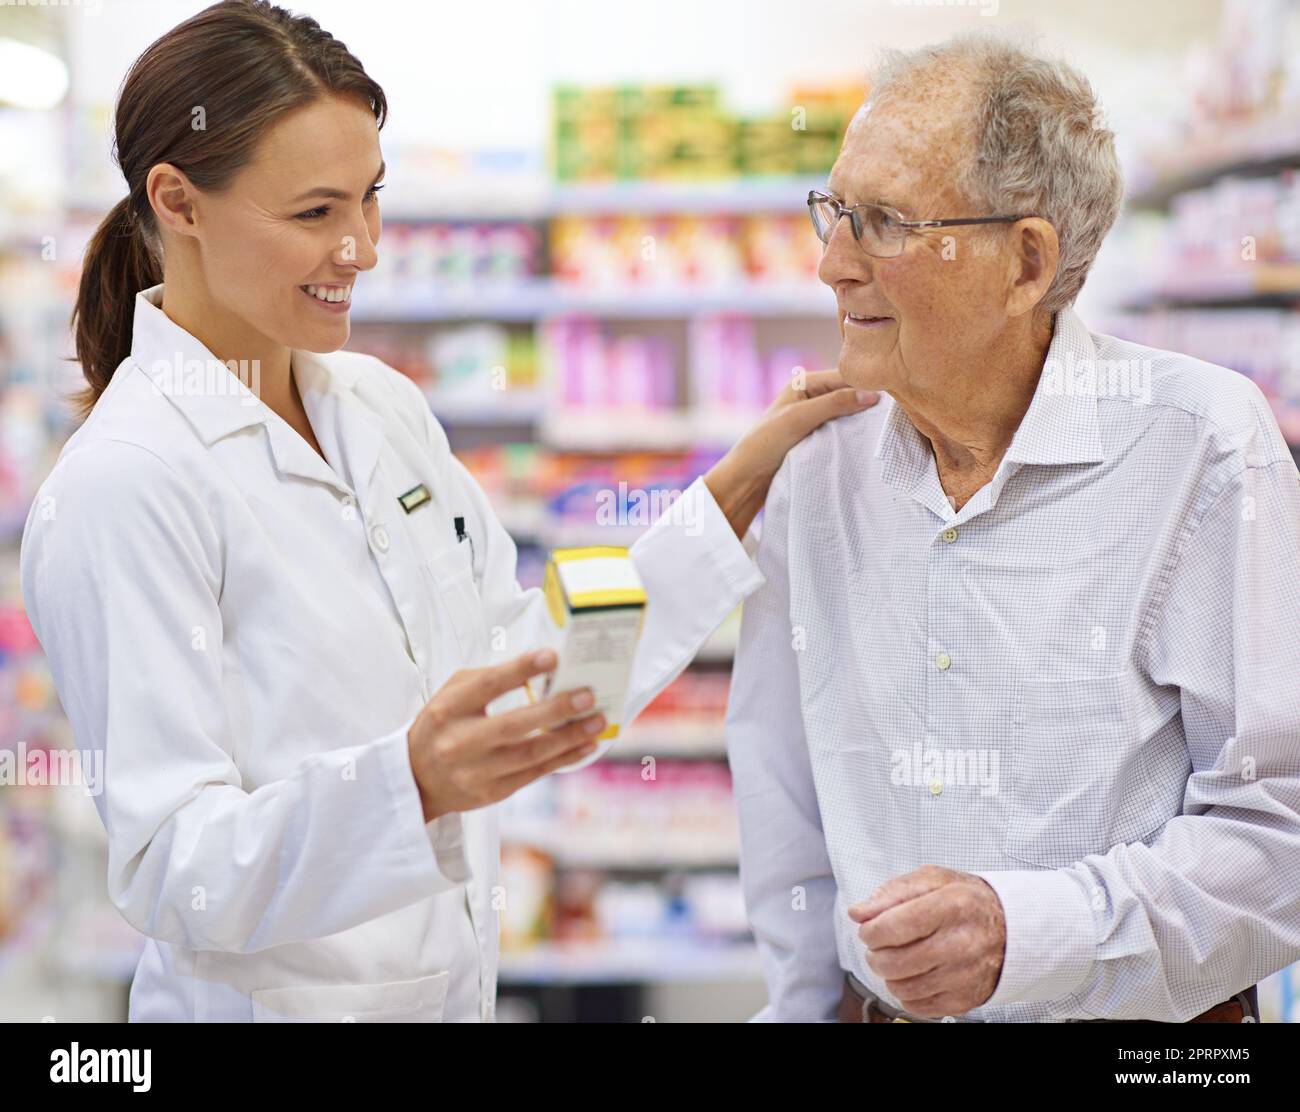 Finding the perfect remedy. a young pharmacist helping an elderly customer. Stock Photo